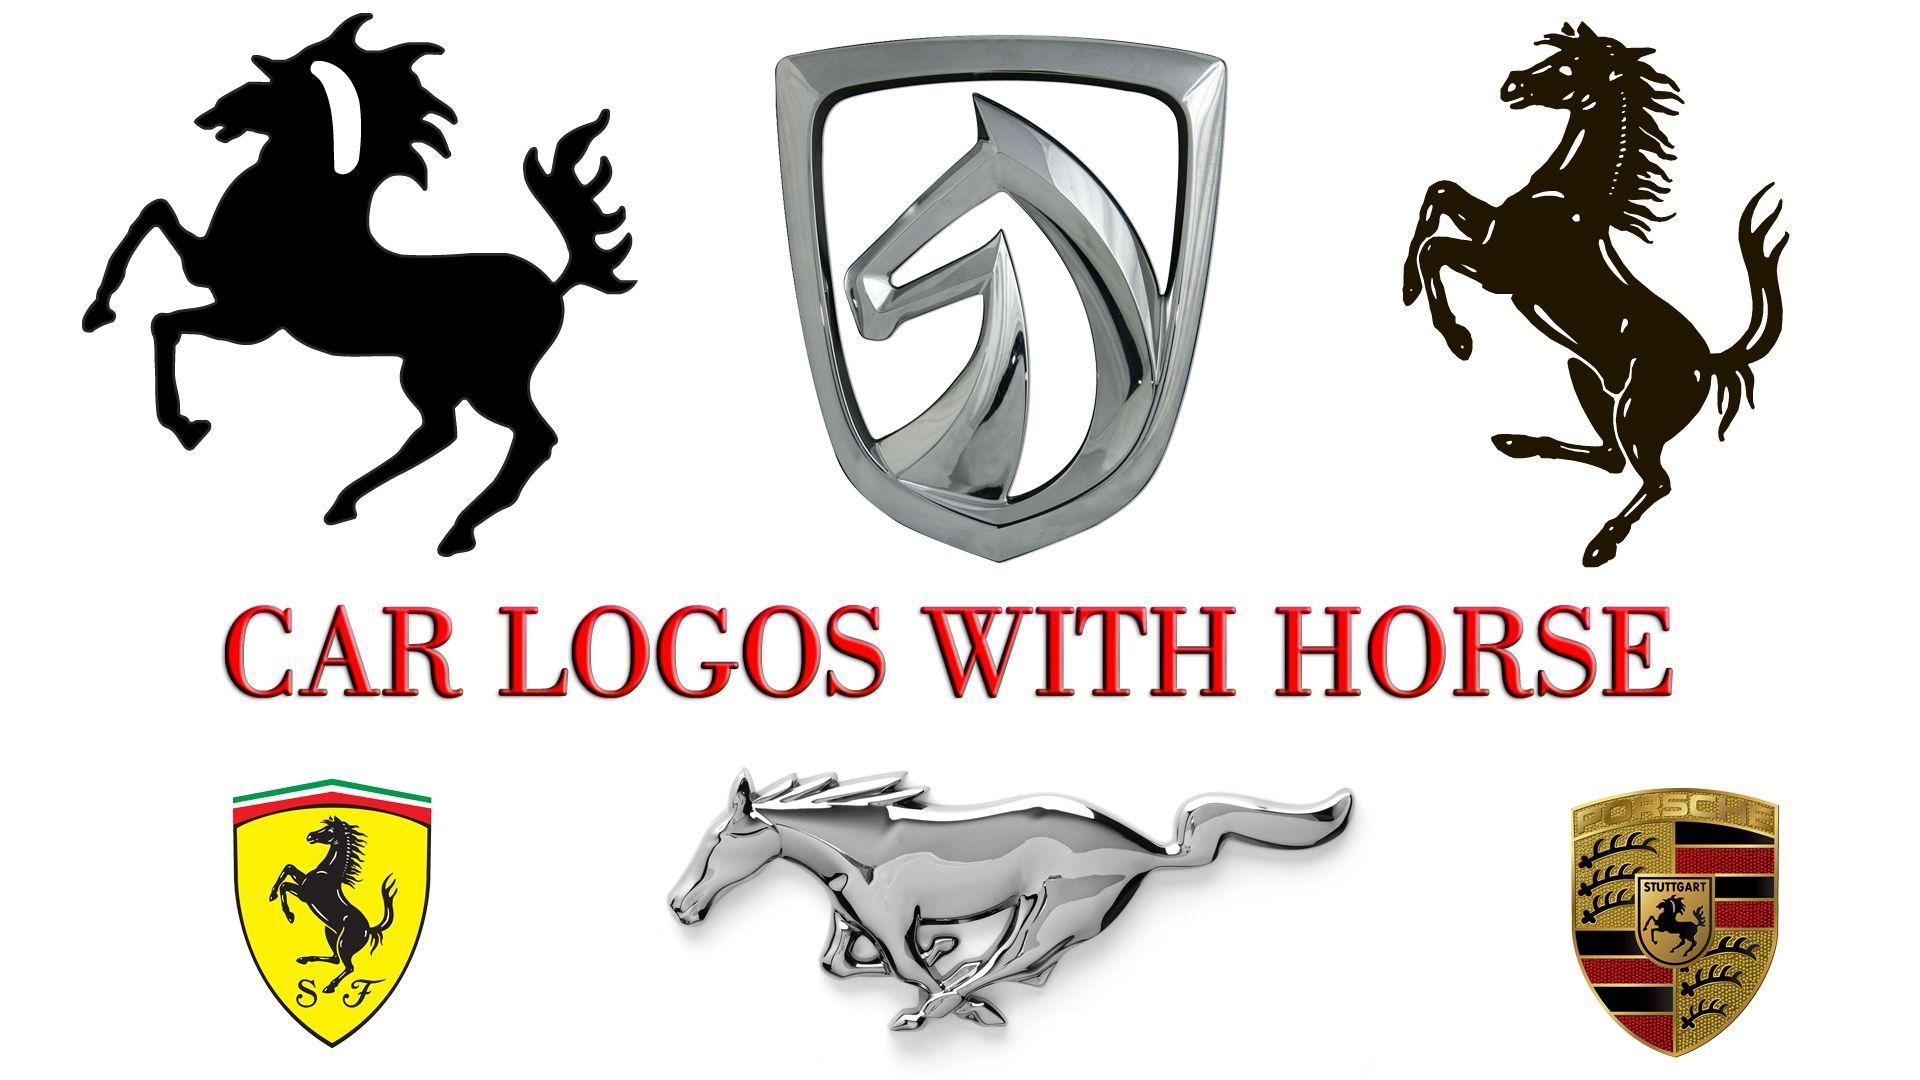 Stallion Car Logo - Car Logos with Horse. No matter what your company specializes on ...